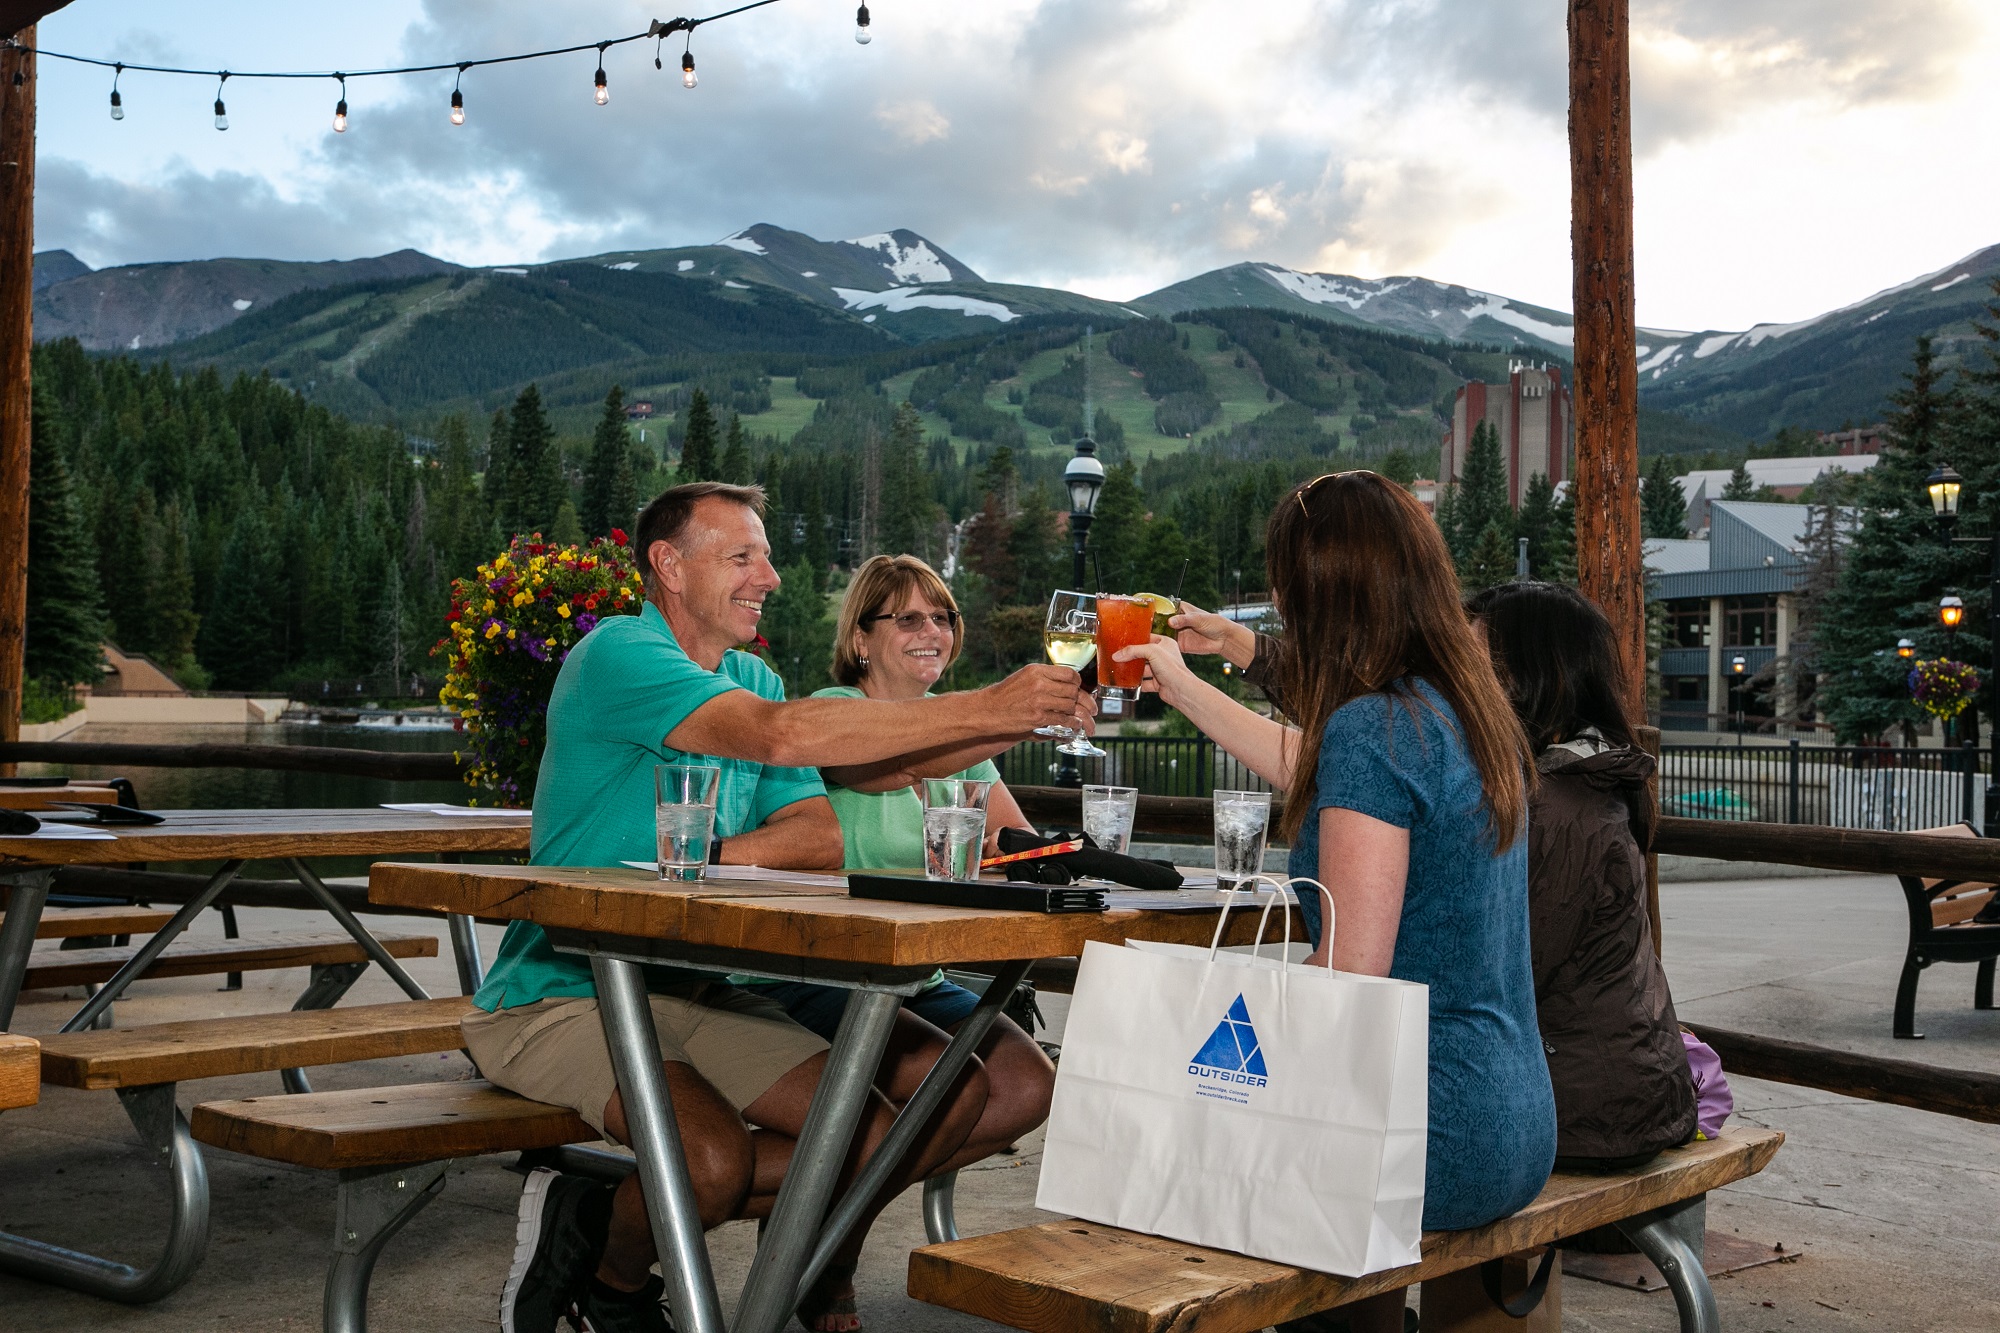 Group drinks on a patio at Quandary Grill in Breckenridge, Colorado